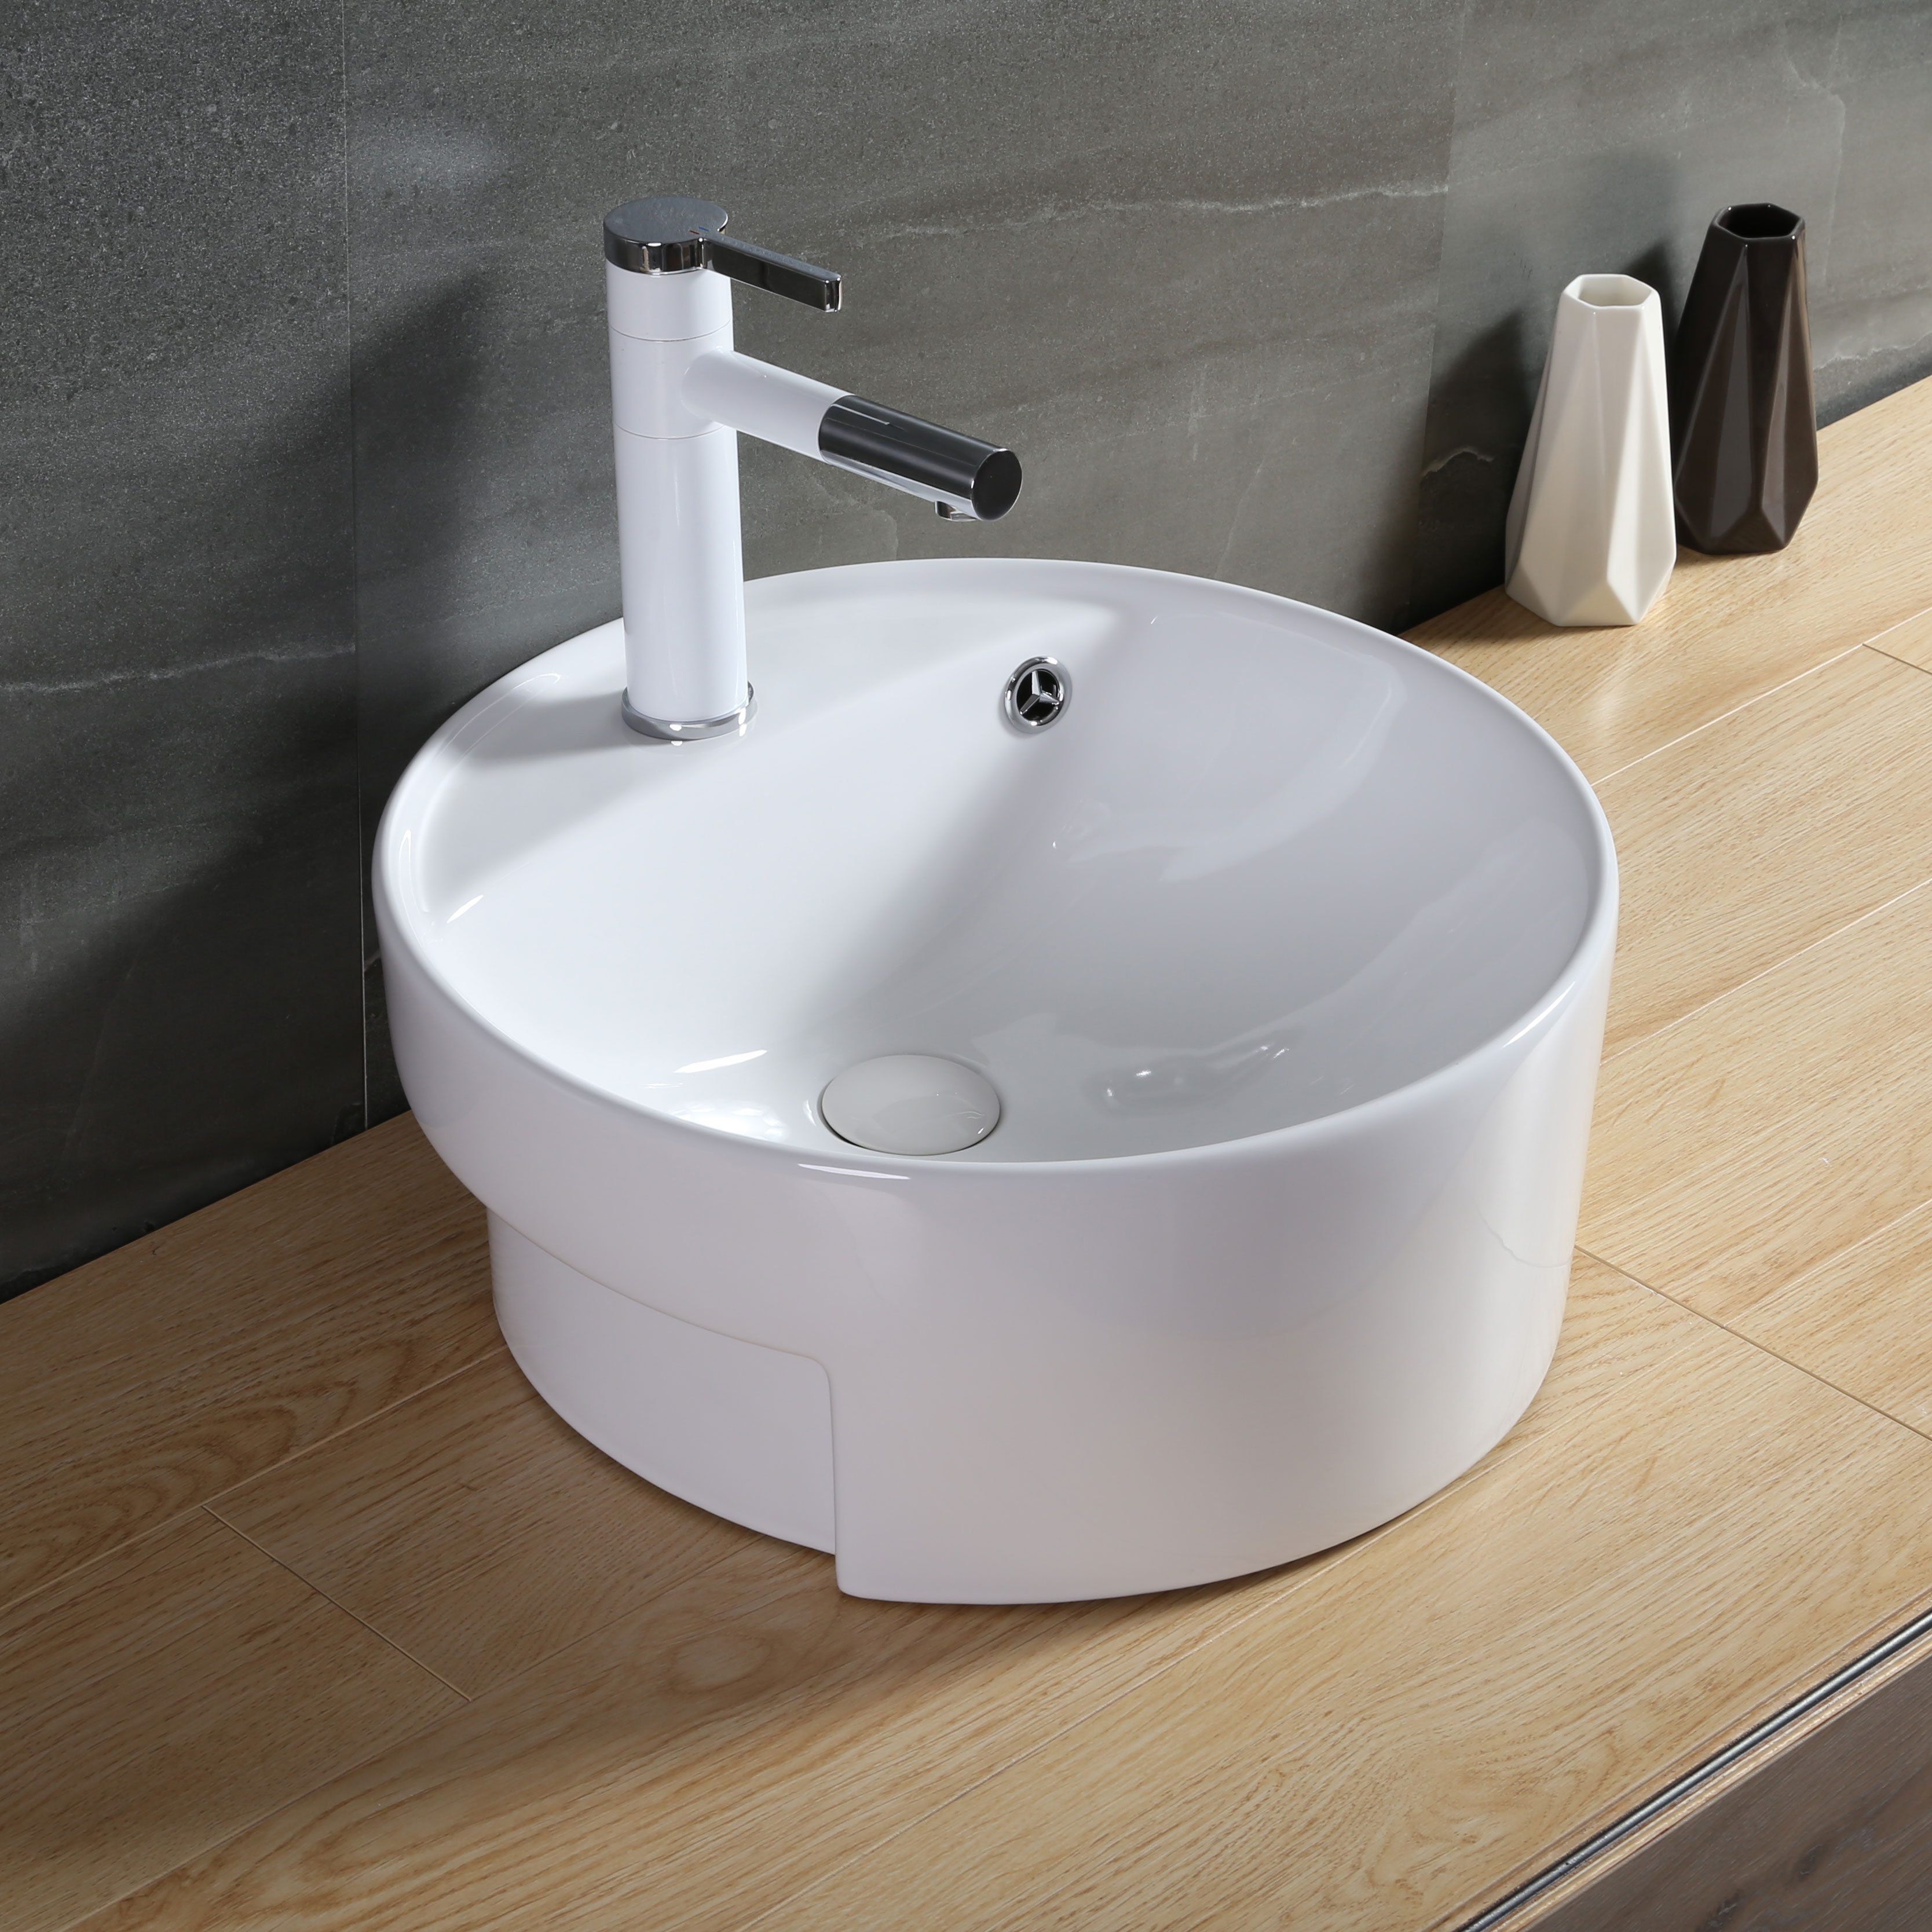 The Latest Innovations in Toilet Sets - Optimize Your Bathroom Experience